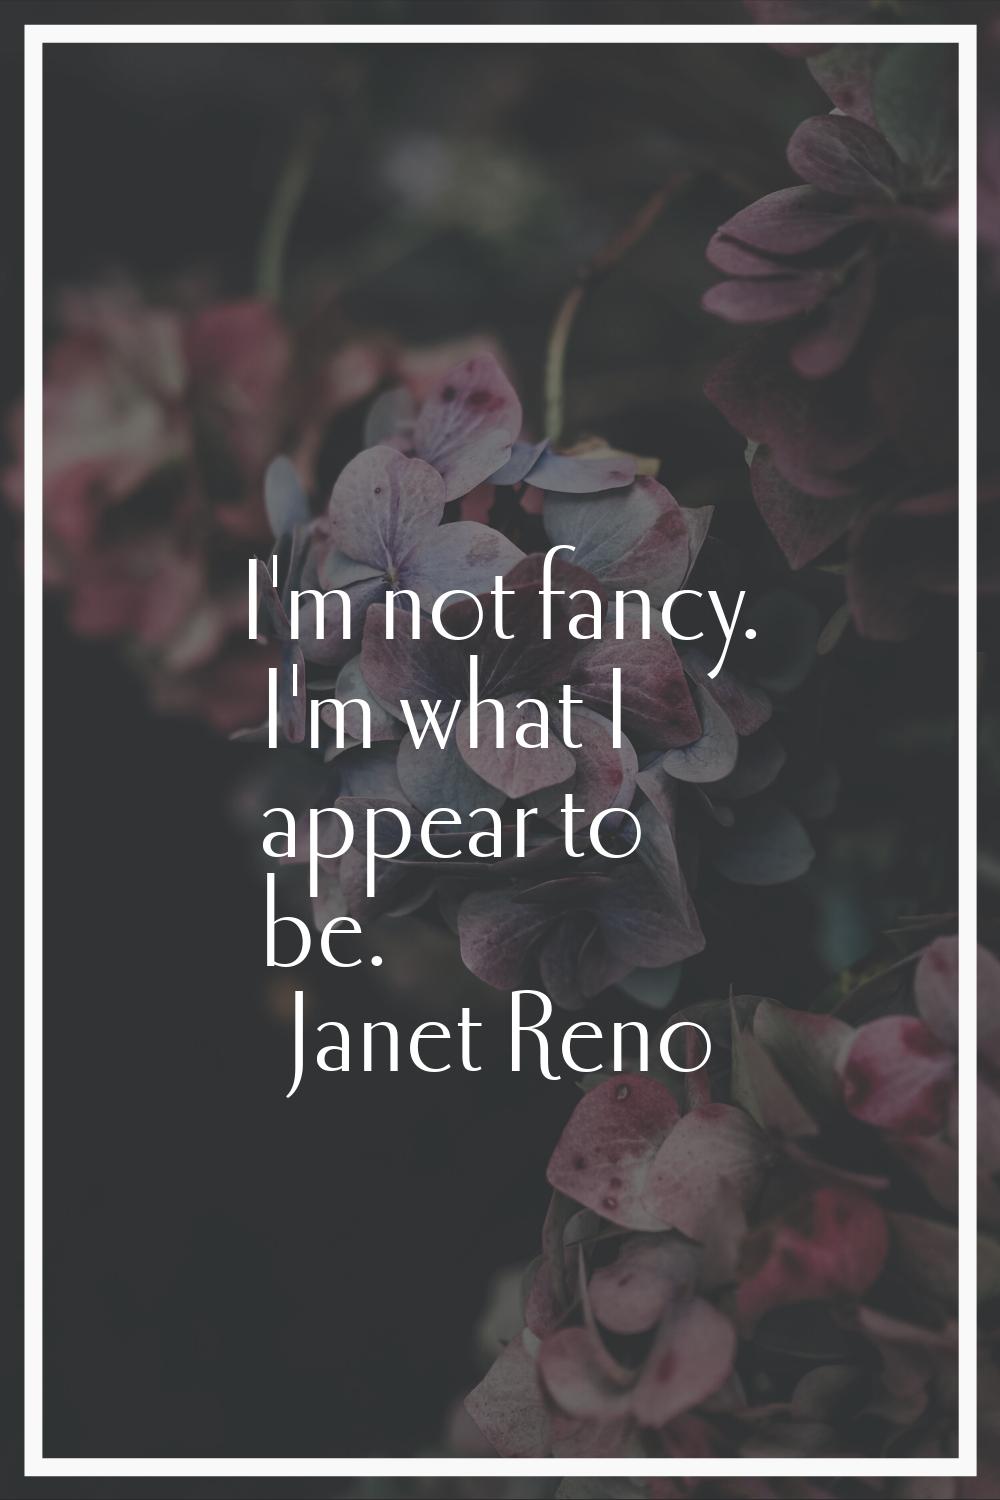 I'm not fancy. I'm what I appear to be.